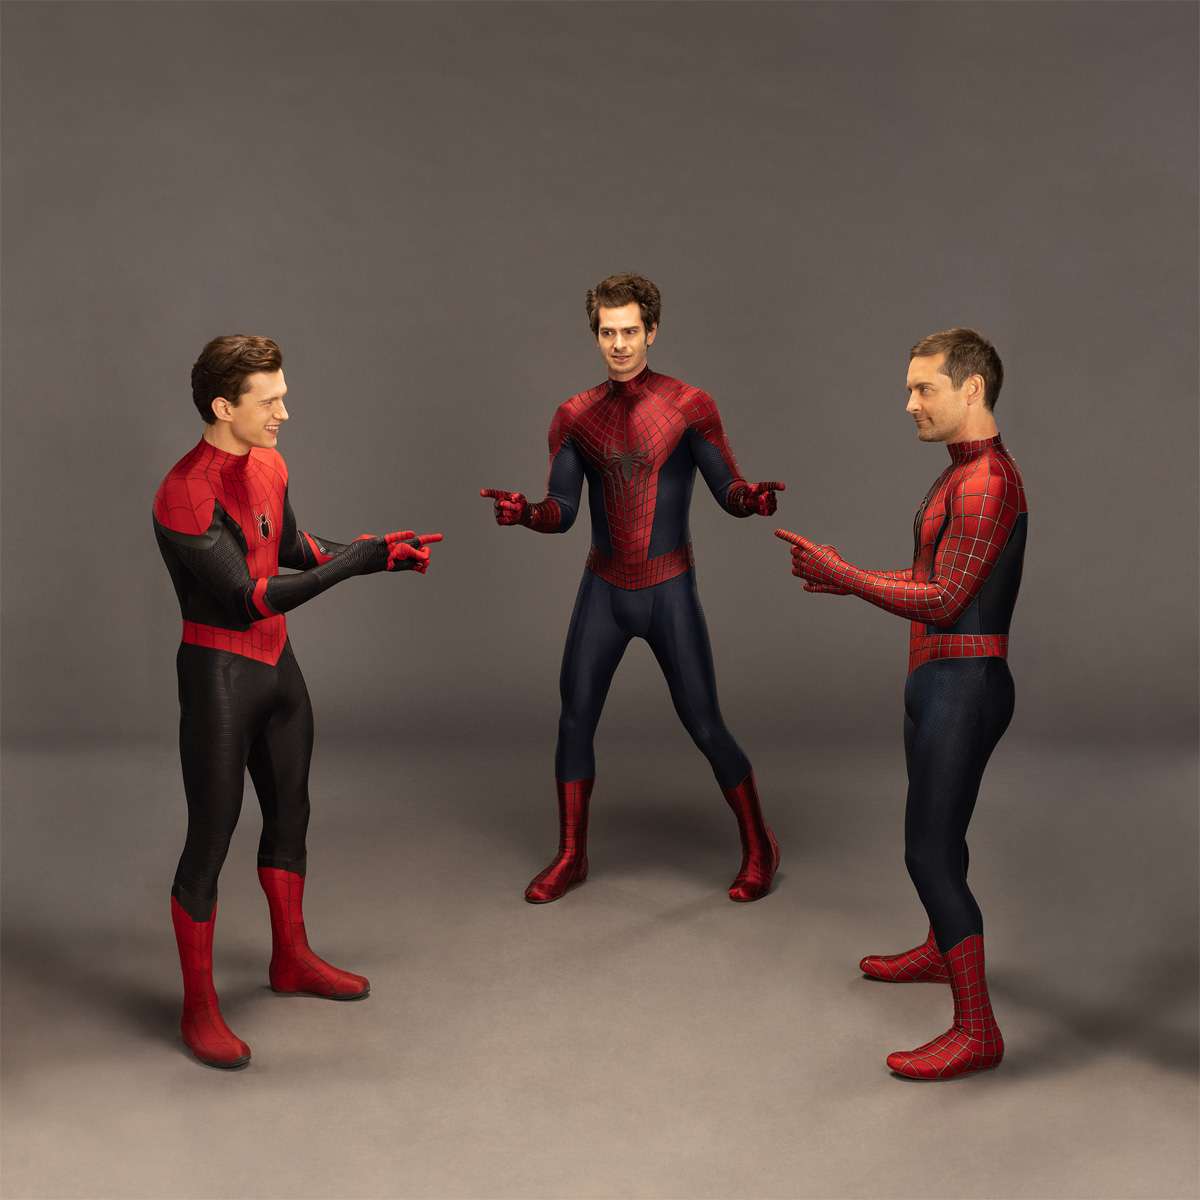 Spider-Man: No Way Home; Tom Holland, Andrew Garfield and Tobey Maguire recreating the pointing meme.